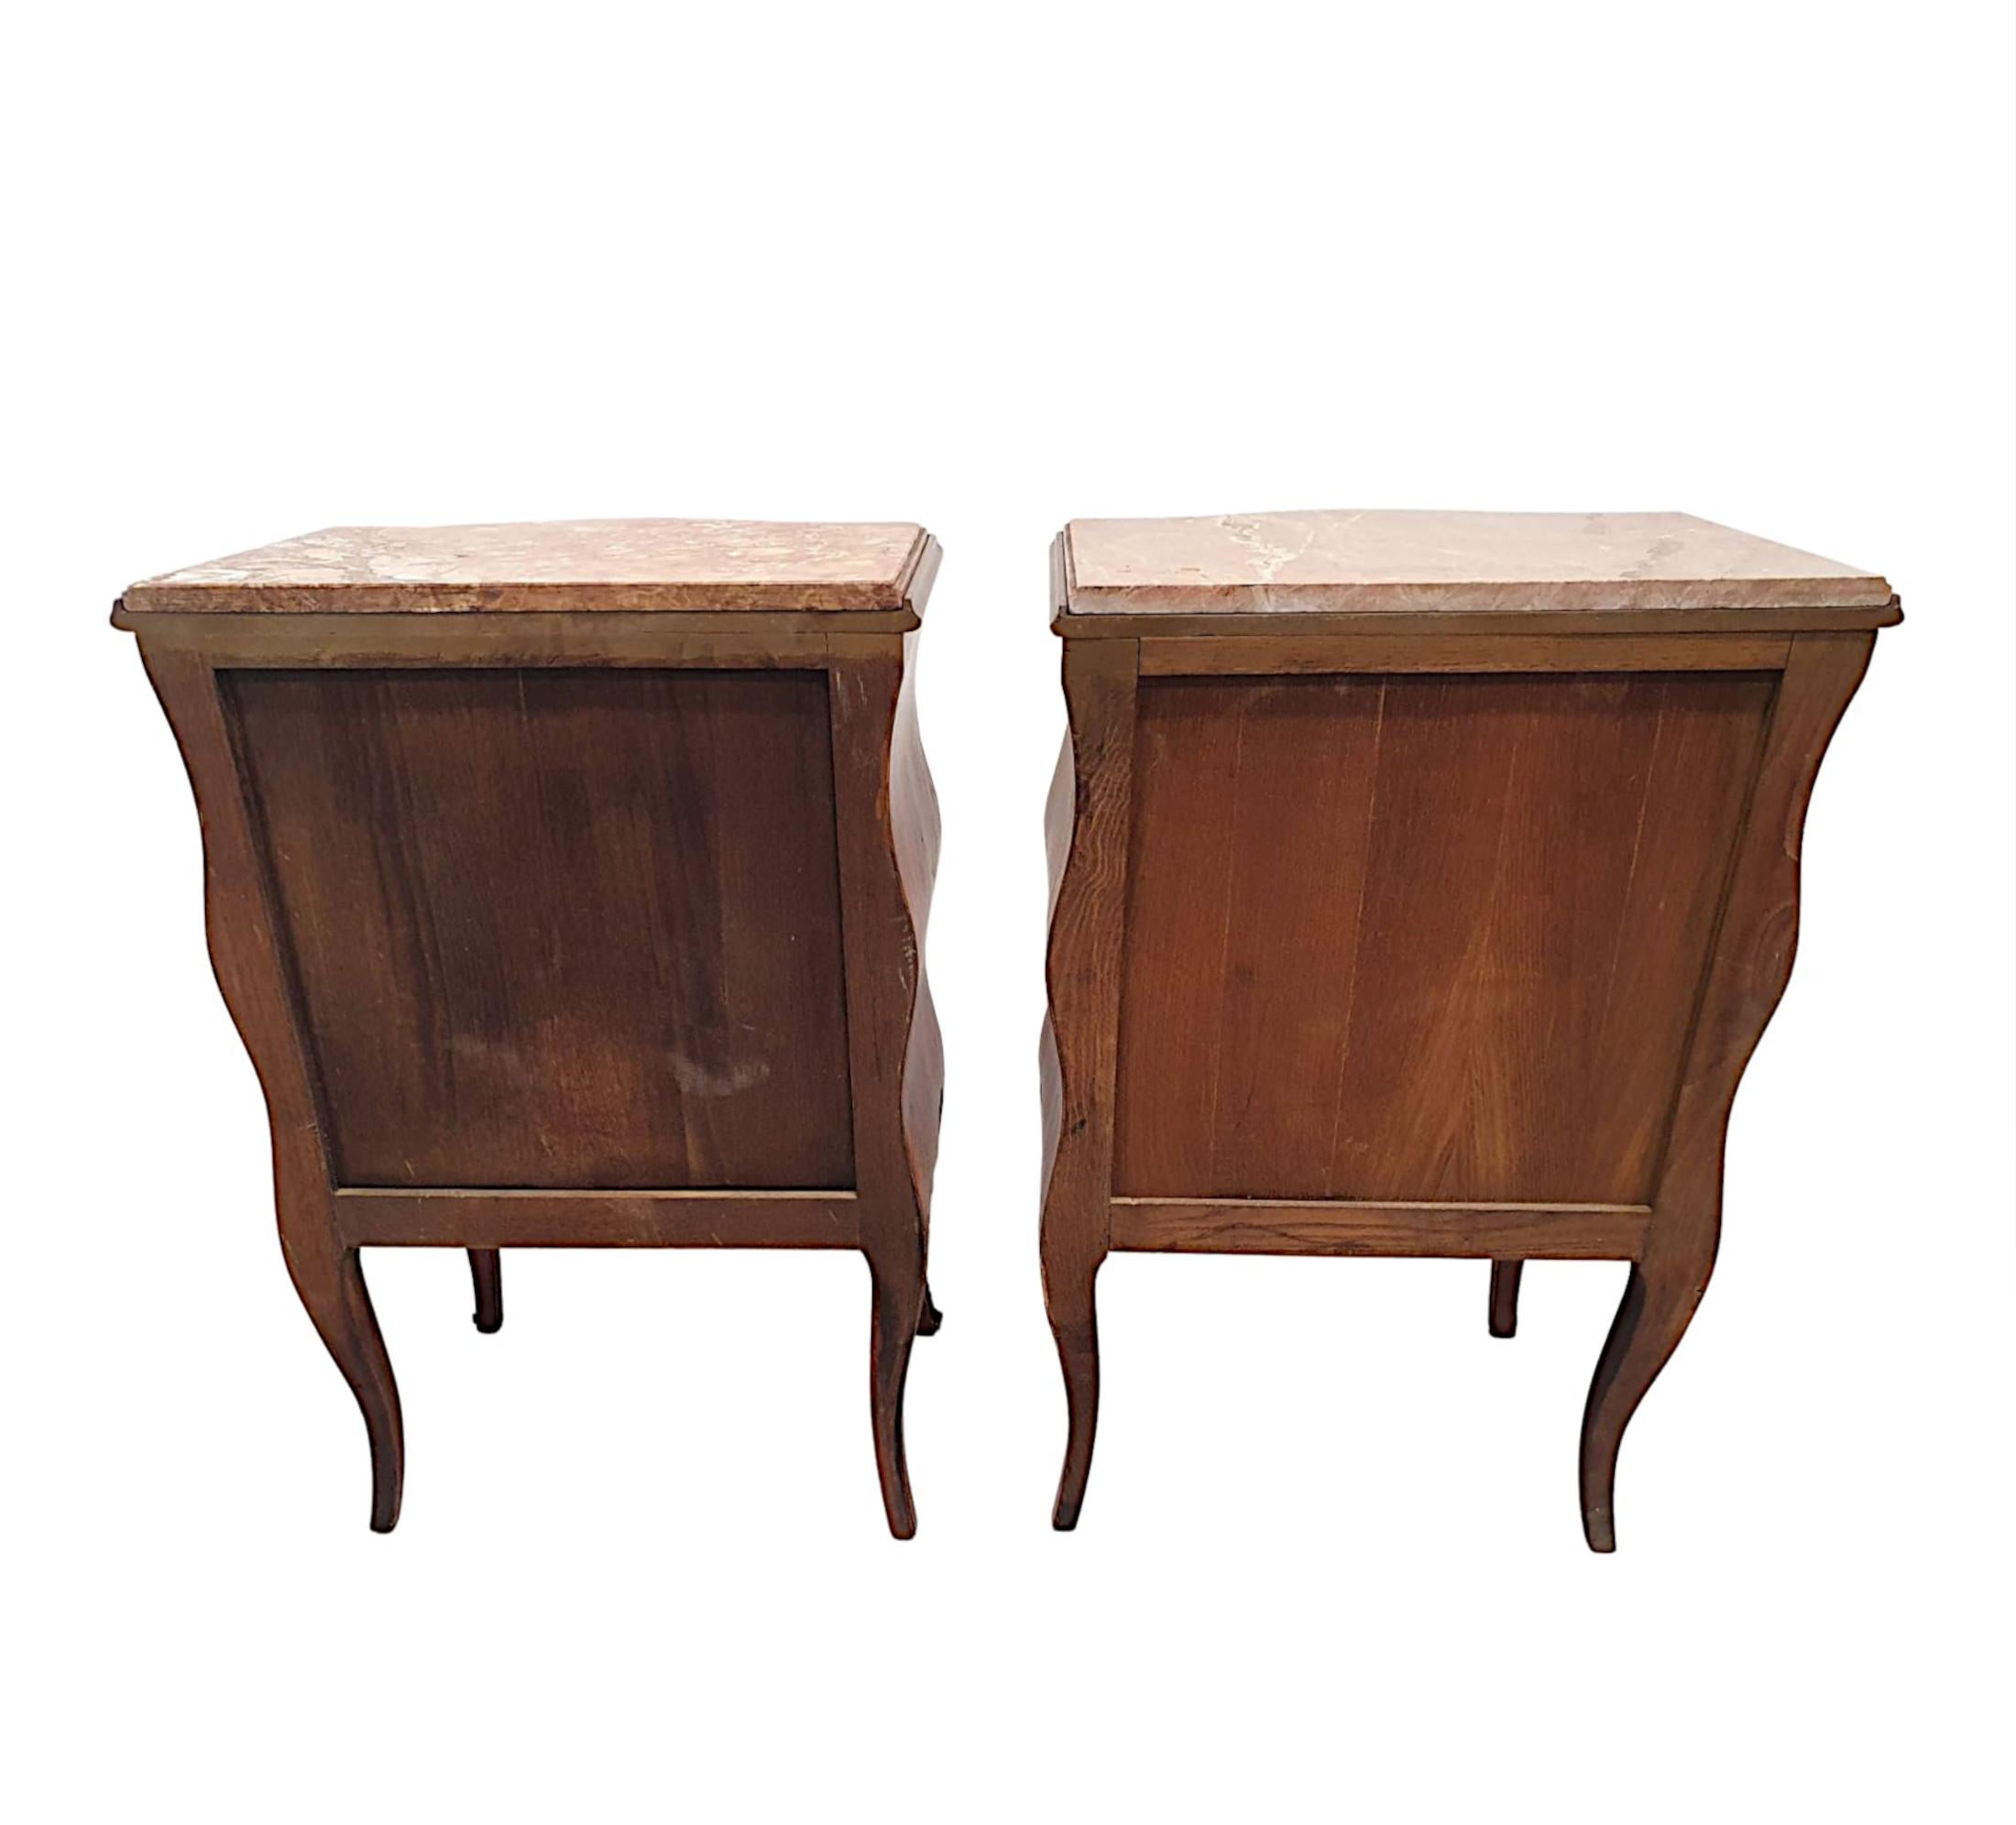 Ormolu Very Fine 19th Century Pair of Large Marble Top Chests For Sale